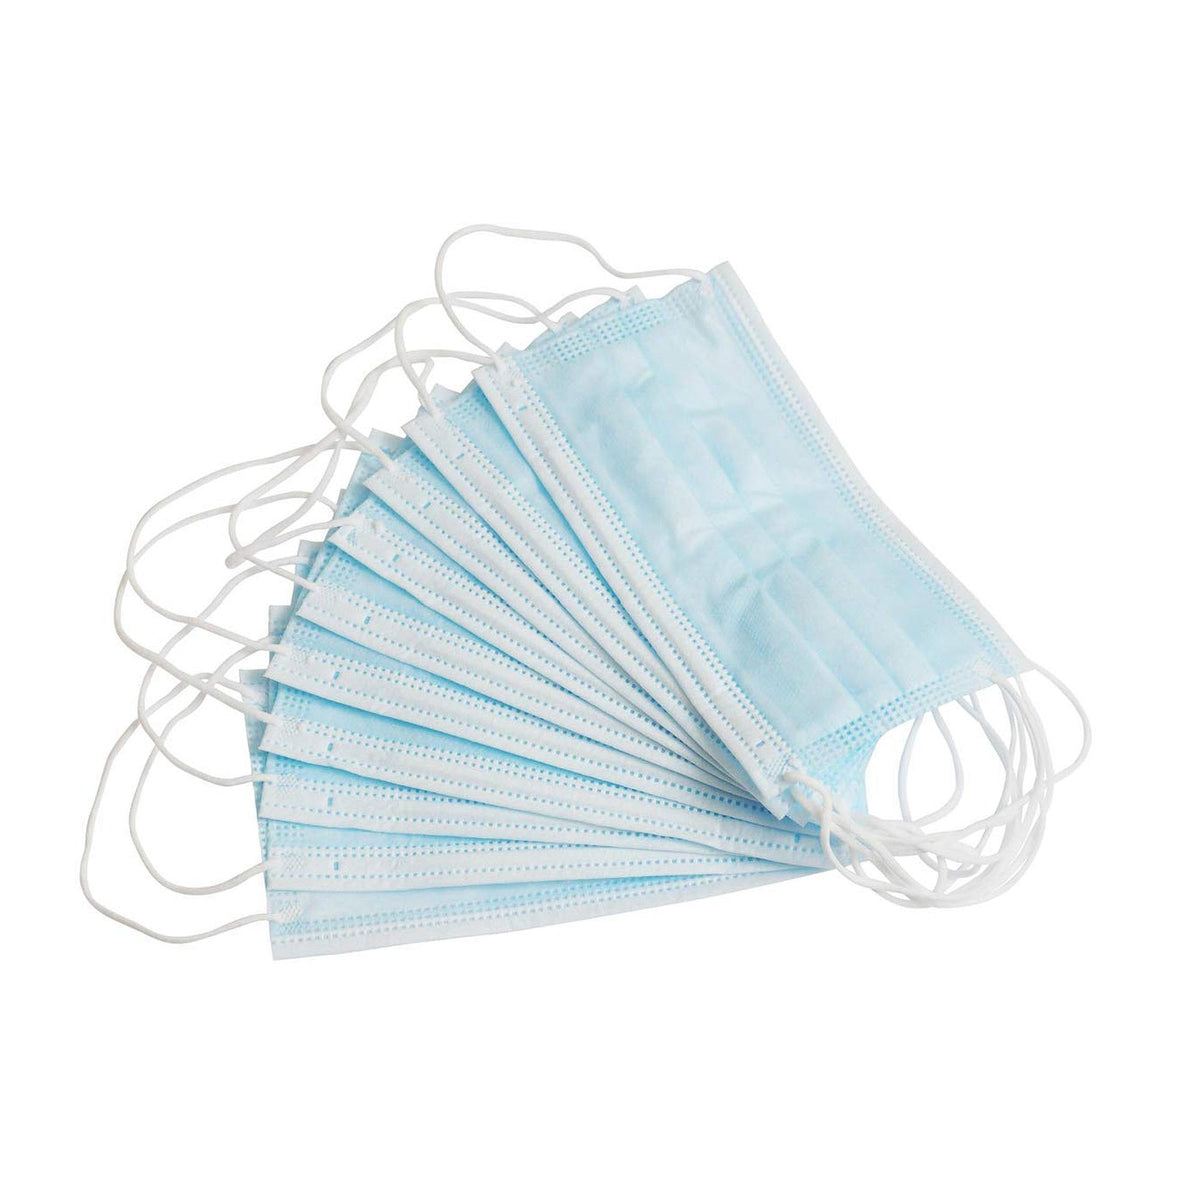 HOSLEY®  Face Mask Breathable Masks Disposable 3-Ply, Pack of 20 pieces